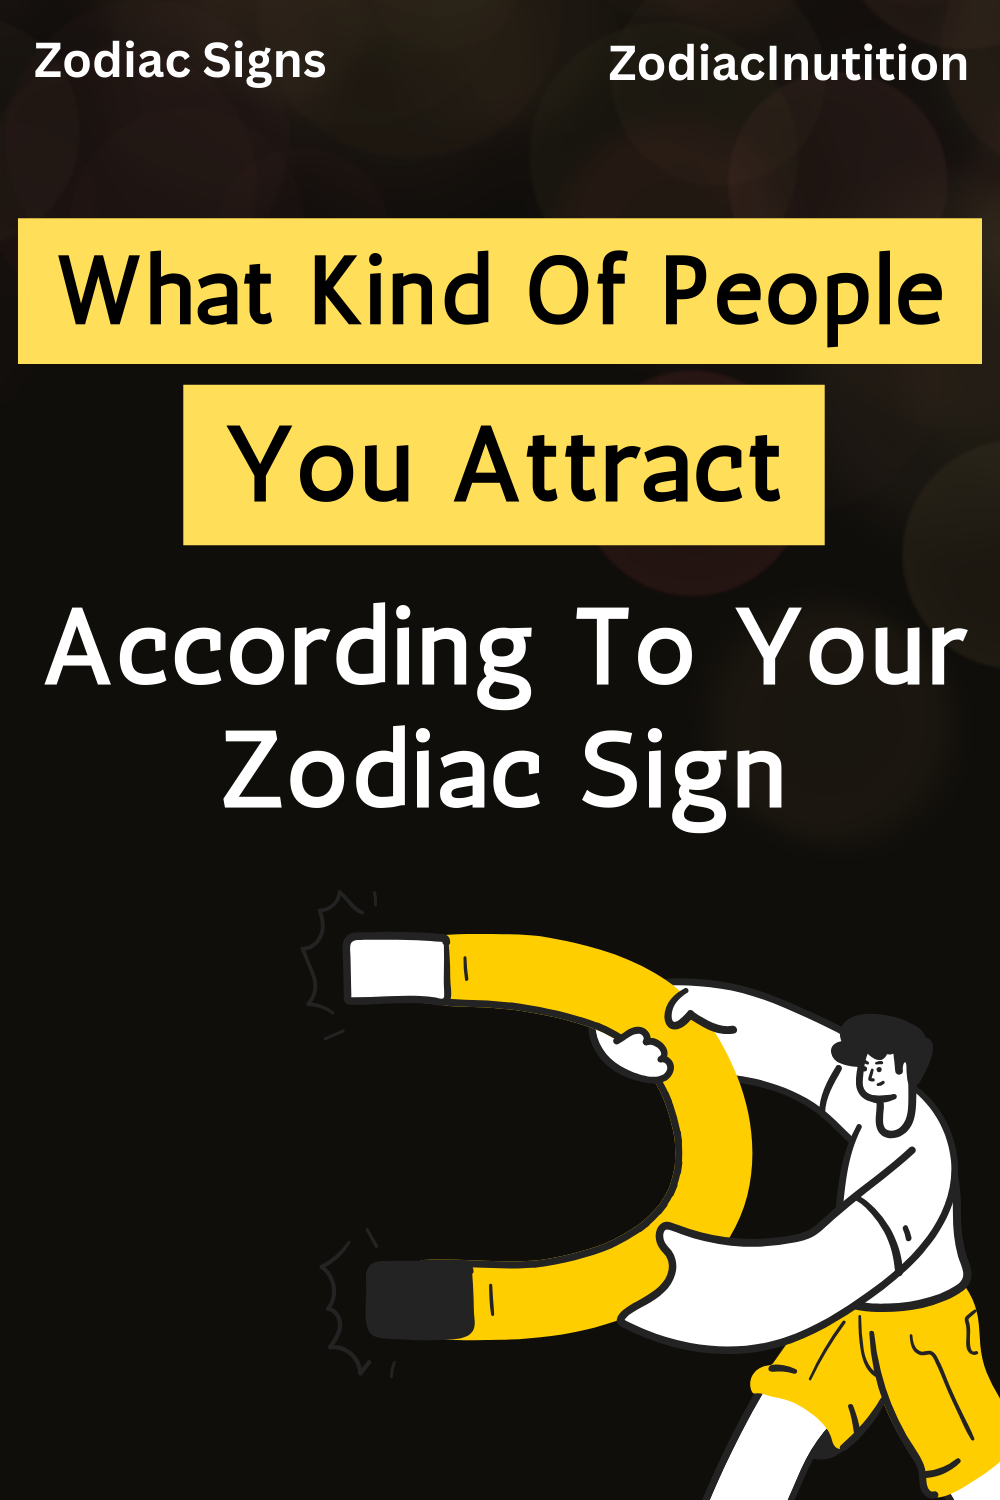 What Kind Of People You Attract According To Your Zodiac Sign